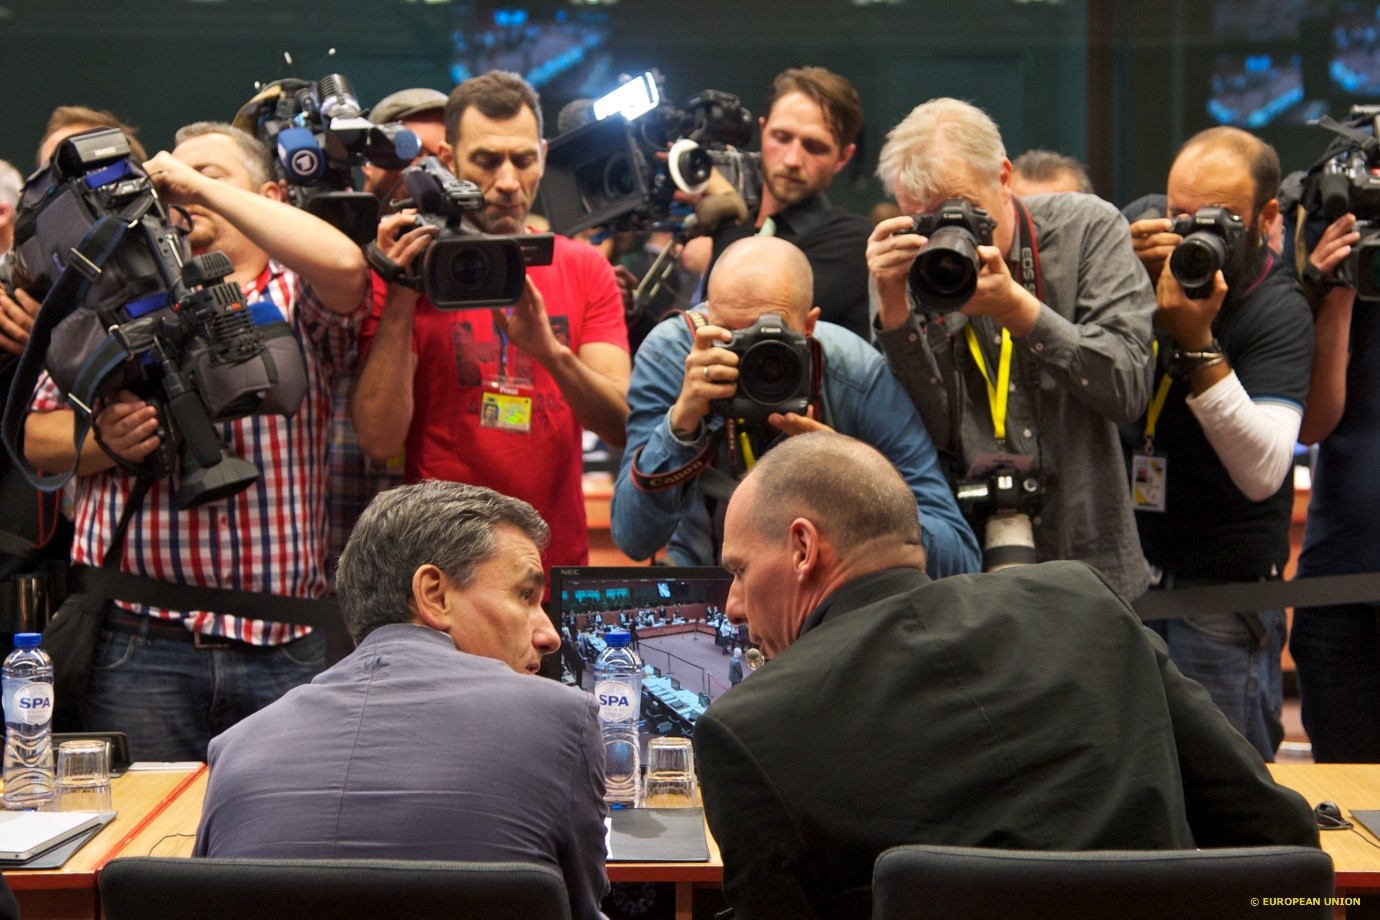 Two men sitting at a table and talking together. A large group of press photographers in front of them.